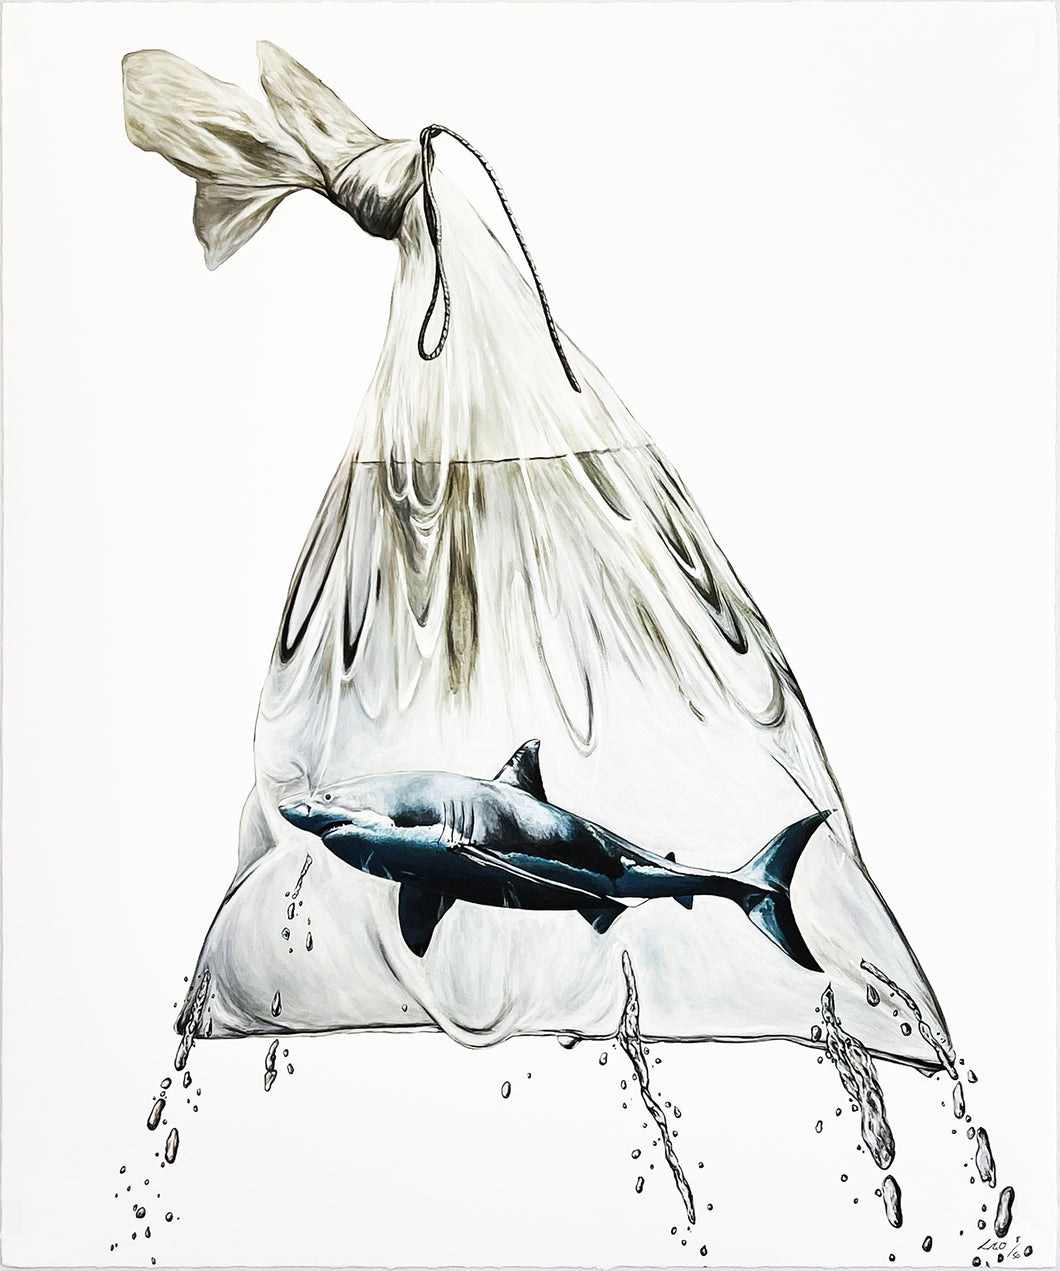 LOUISE McNAUGHT 'In the Bag' Giclée Print - Signari Gallery 